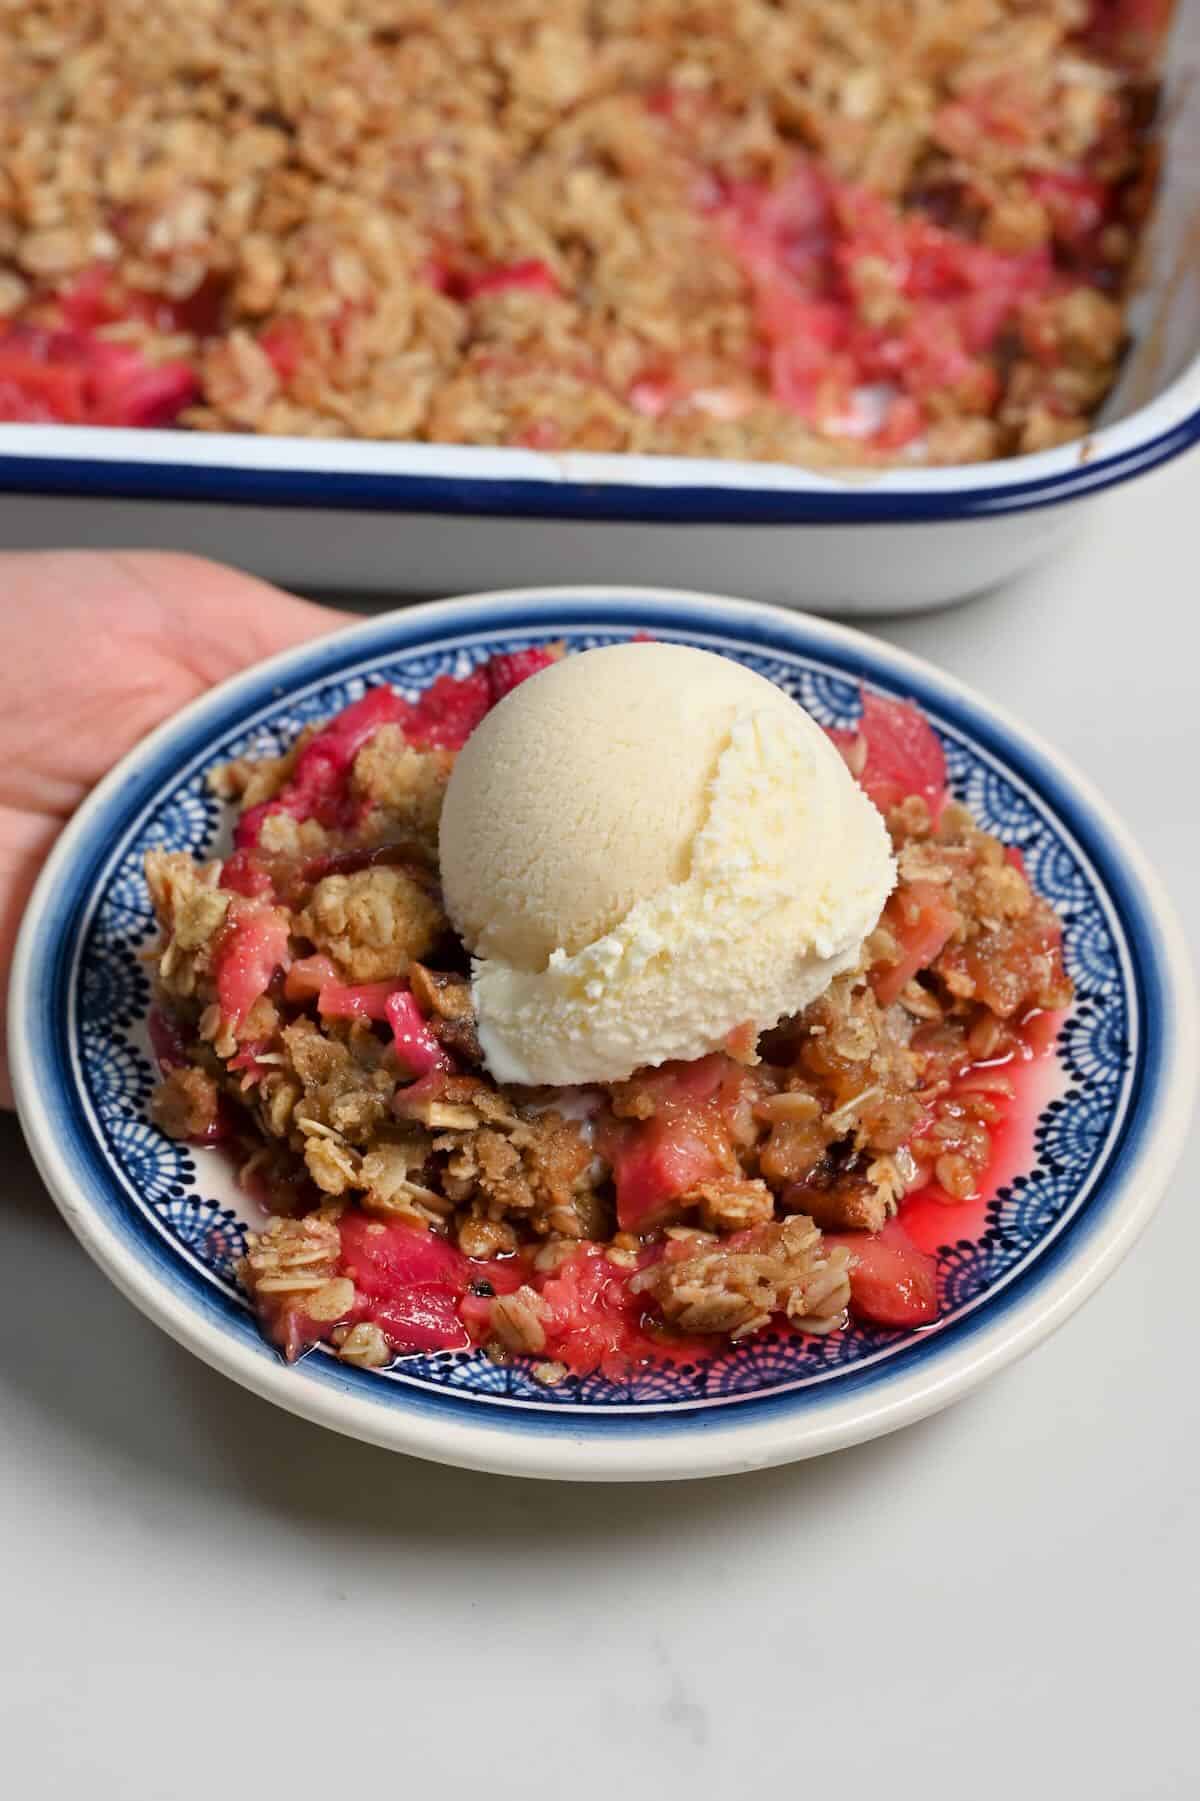 A serving of rhubarb crisp topped with ice cream